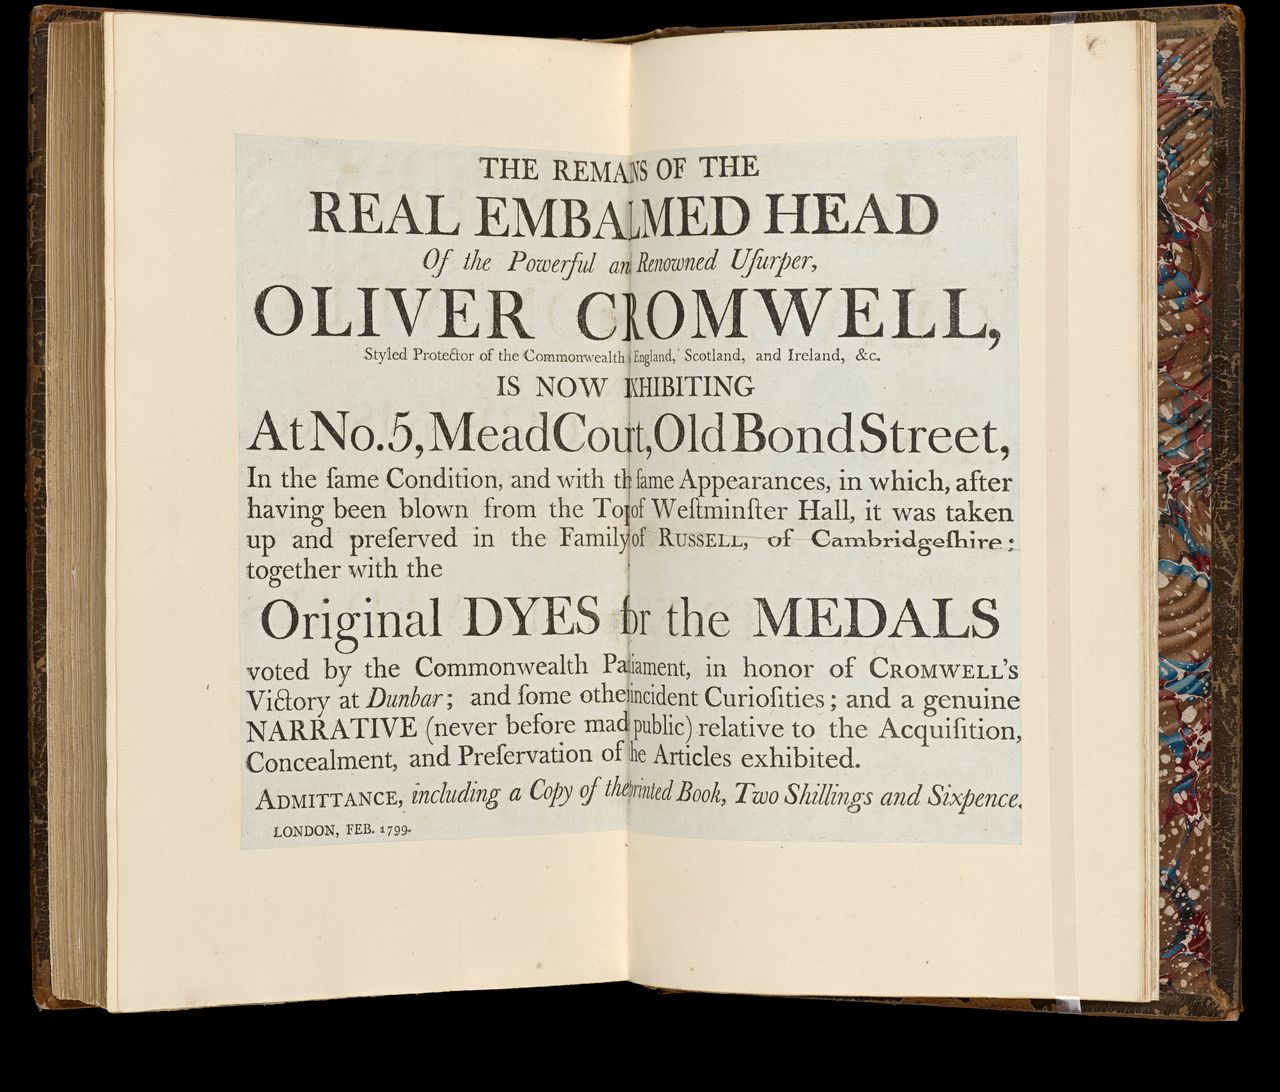 <em>The Remains of the real embalmed head of the powerful and renowned usurper Oliver Cromwell, styled protector of the Commonwealth of England, Scotland, and Ireland, &c. is now exhibiting at no. 5 Mead Court, Old Bond Street... </em>, London, 1799, in an extra-illustrated copy of <em>Cromwelliana: a chronological detail of events in which Oliver Cromwell was engaged …</em>, London, 1810, State Library Victoria, Melbourne (RAREEMM 2016/15)